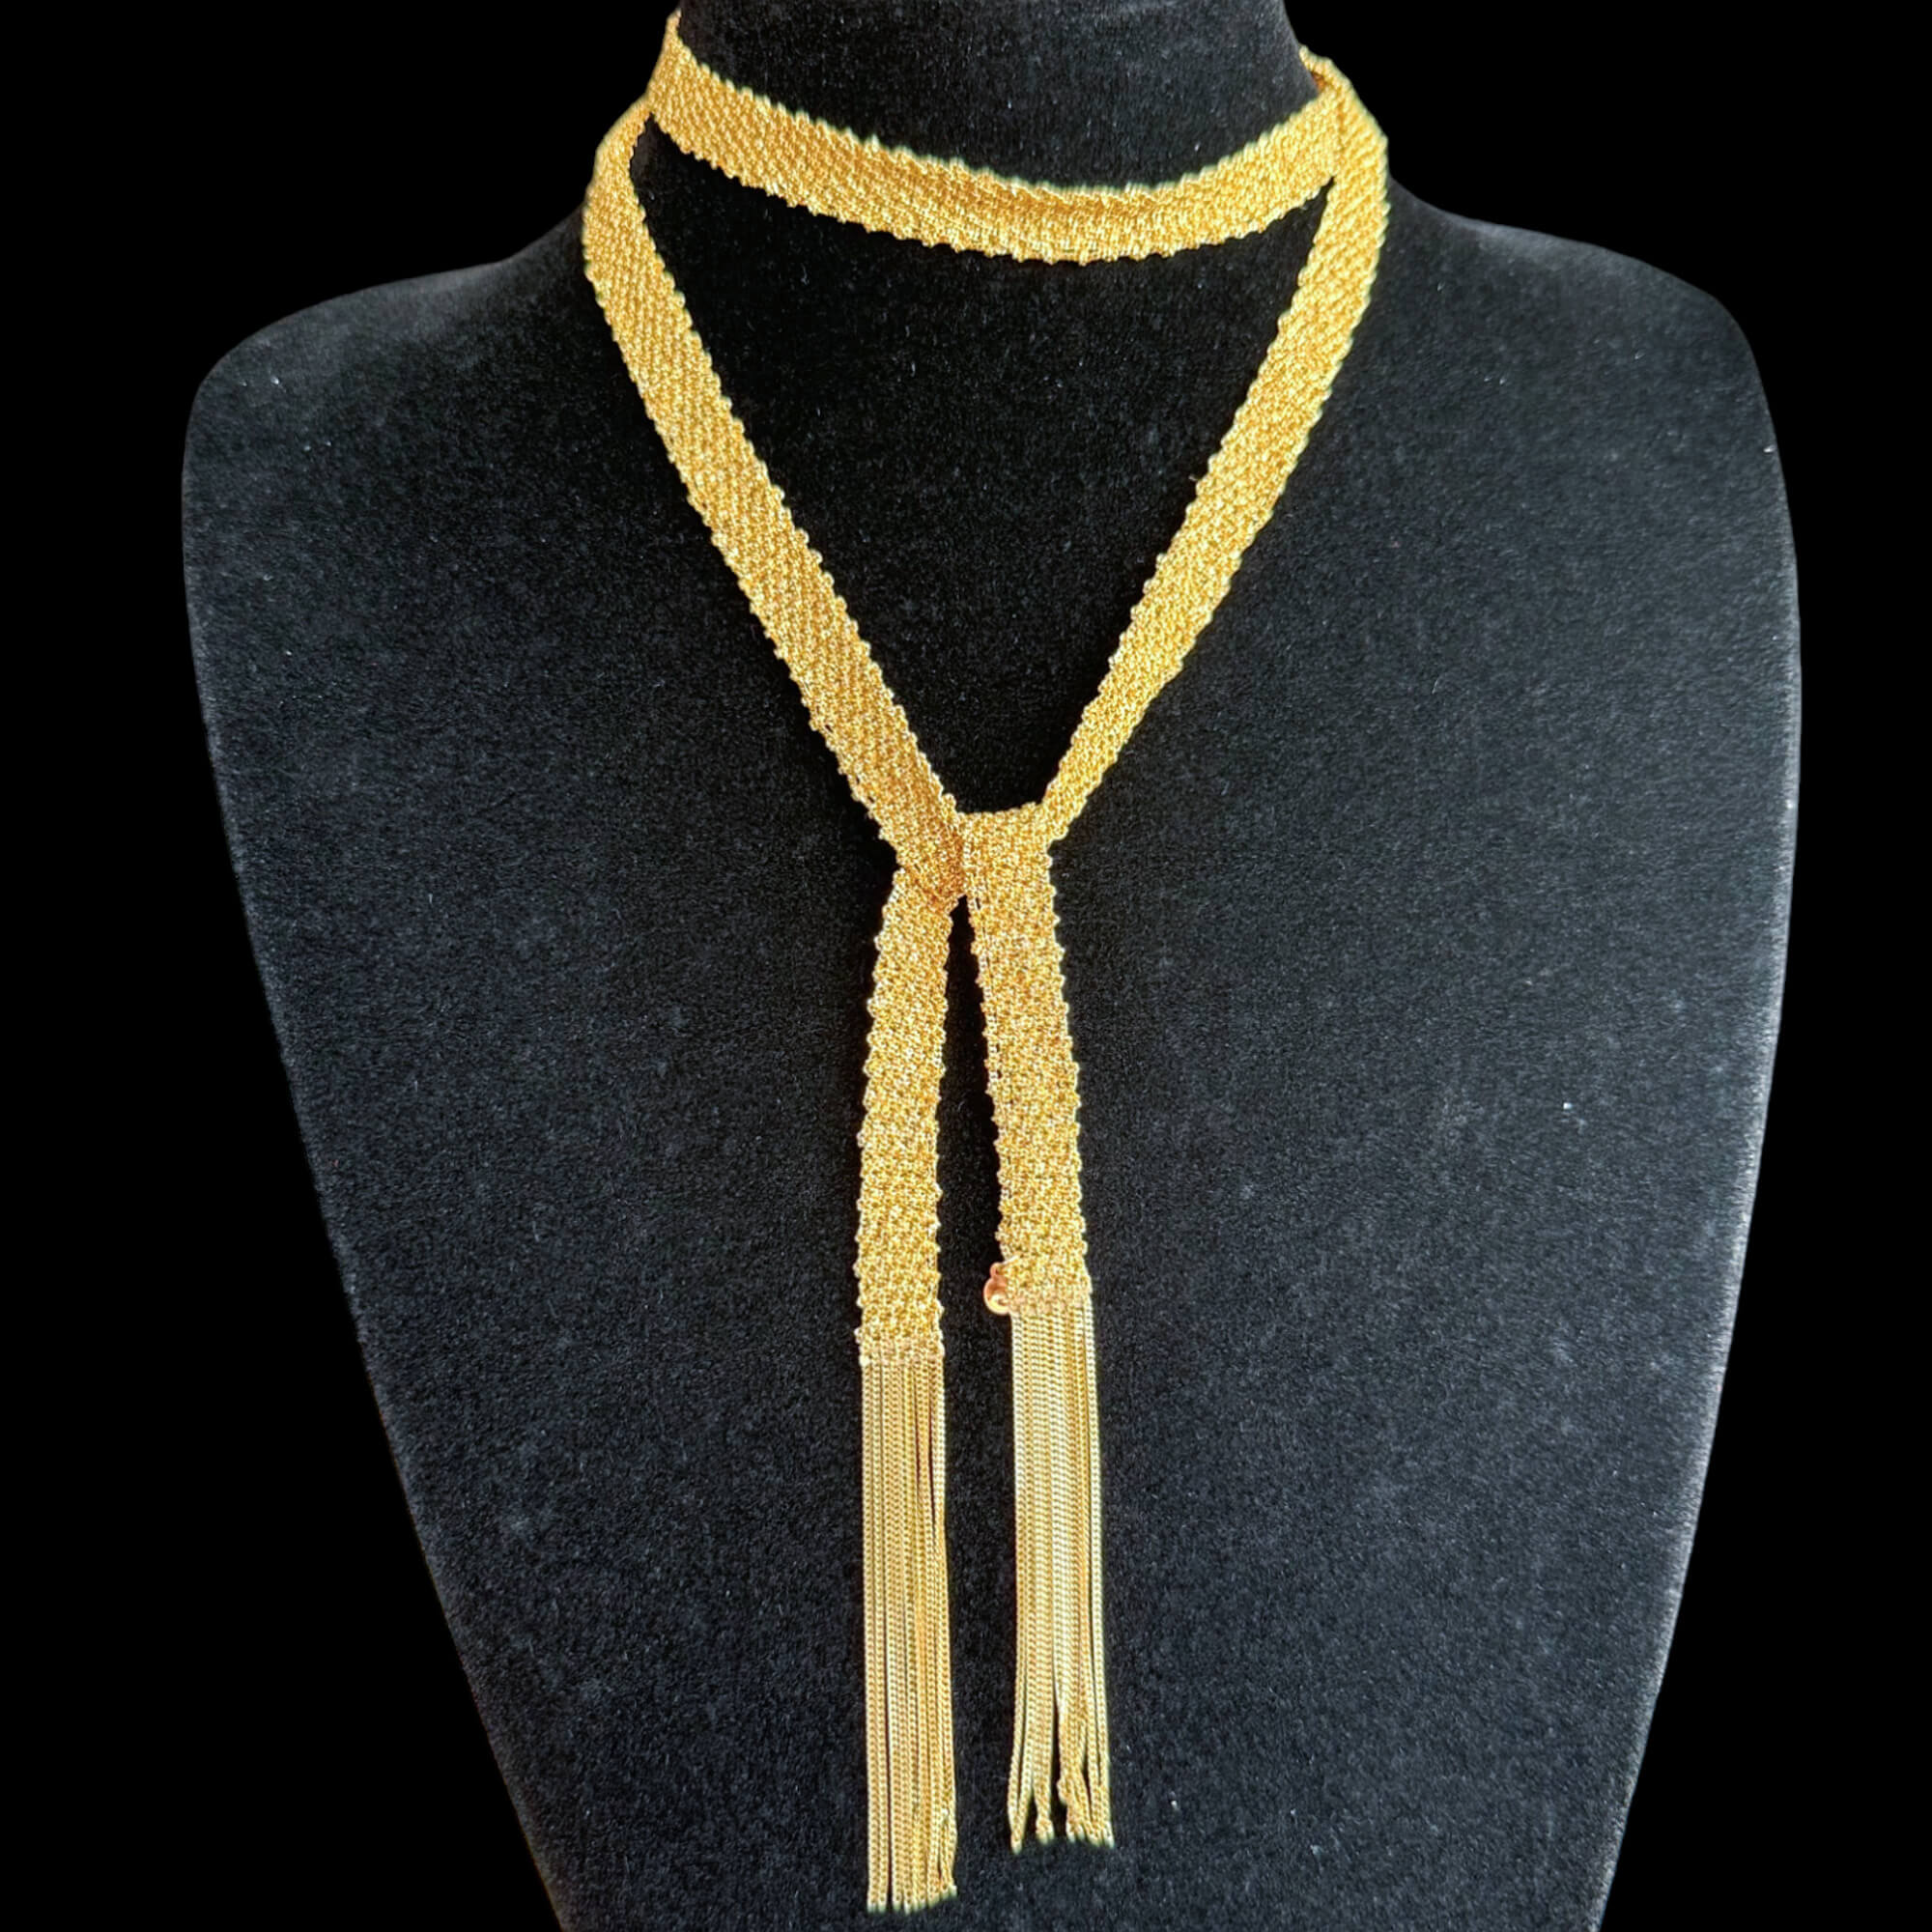 Gilded scarf or interwoven chains